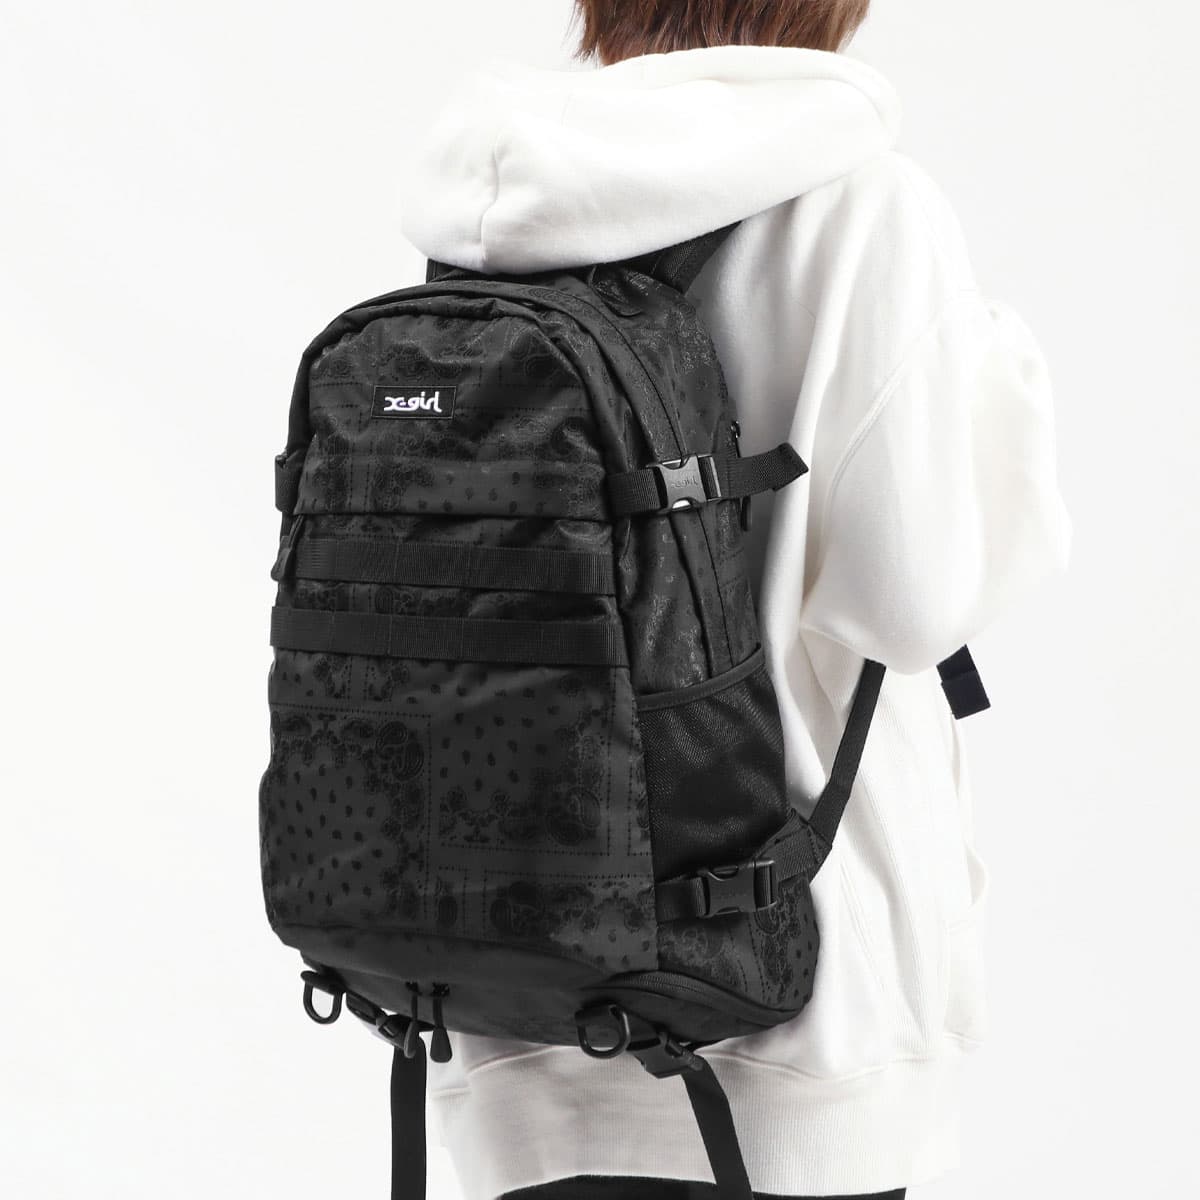 X-girl エックスガール MILLS LOGO ADVENTURE BACKPACK バックパック